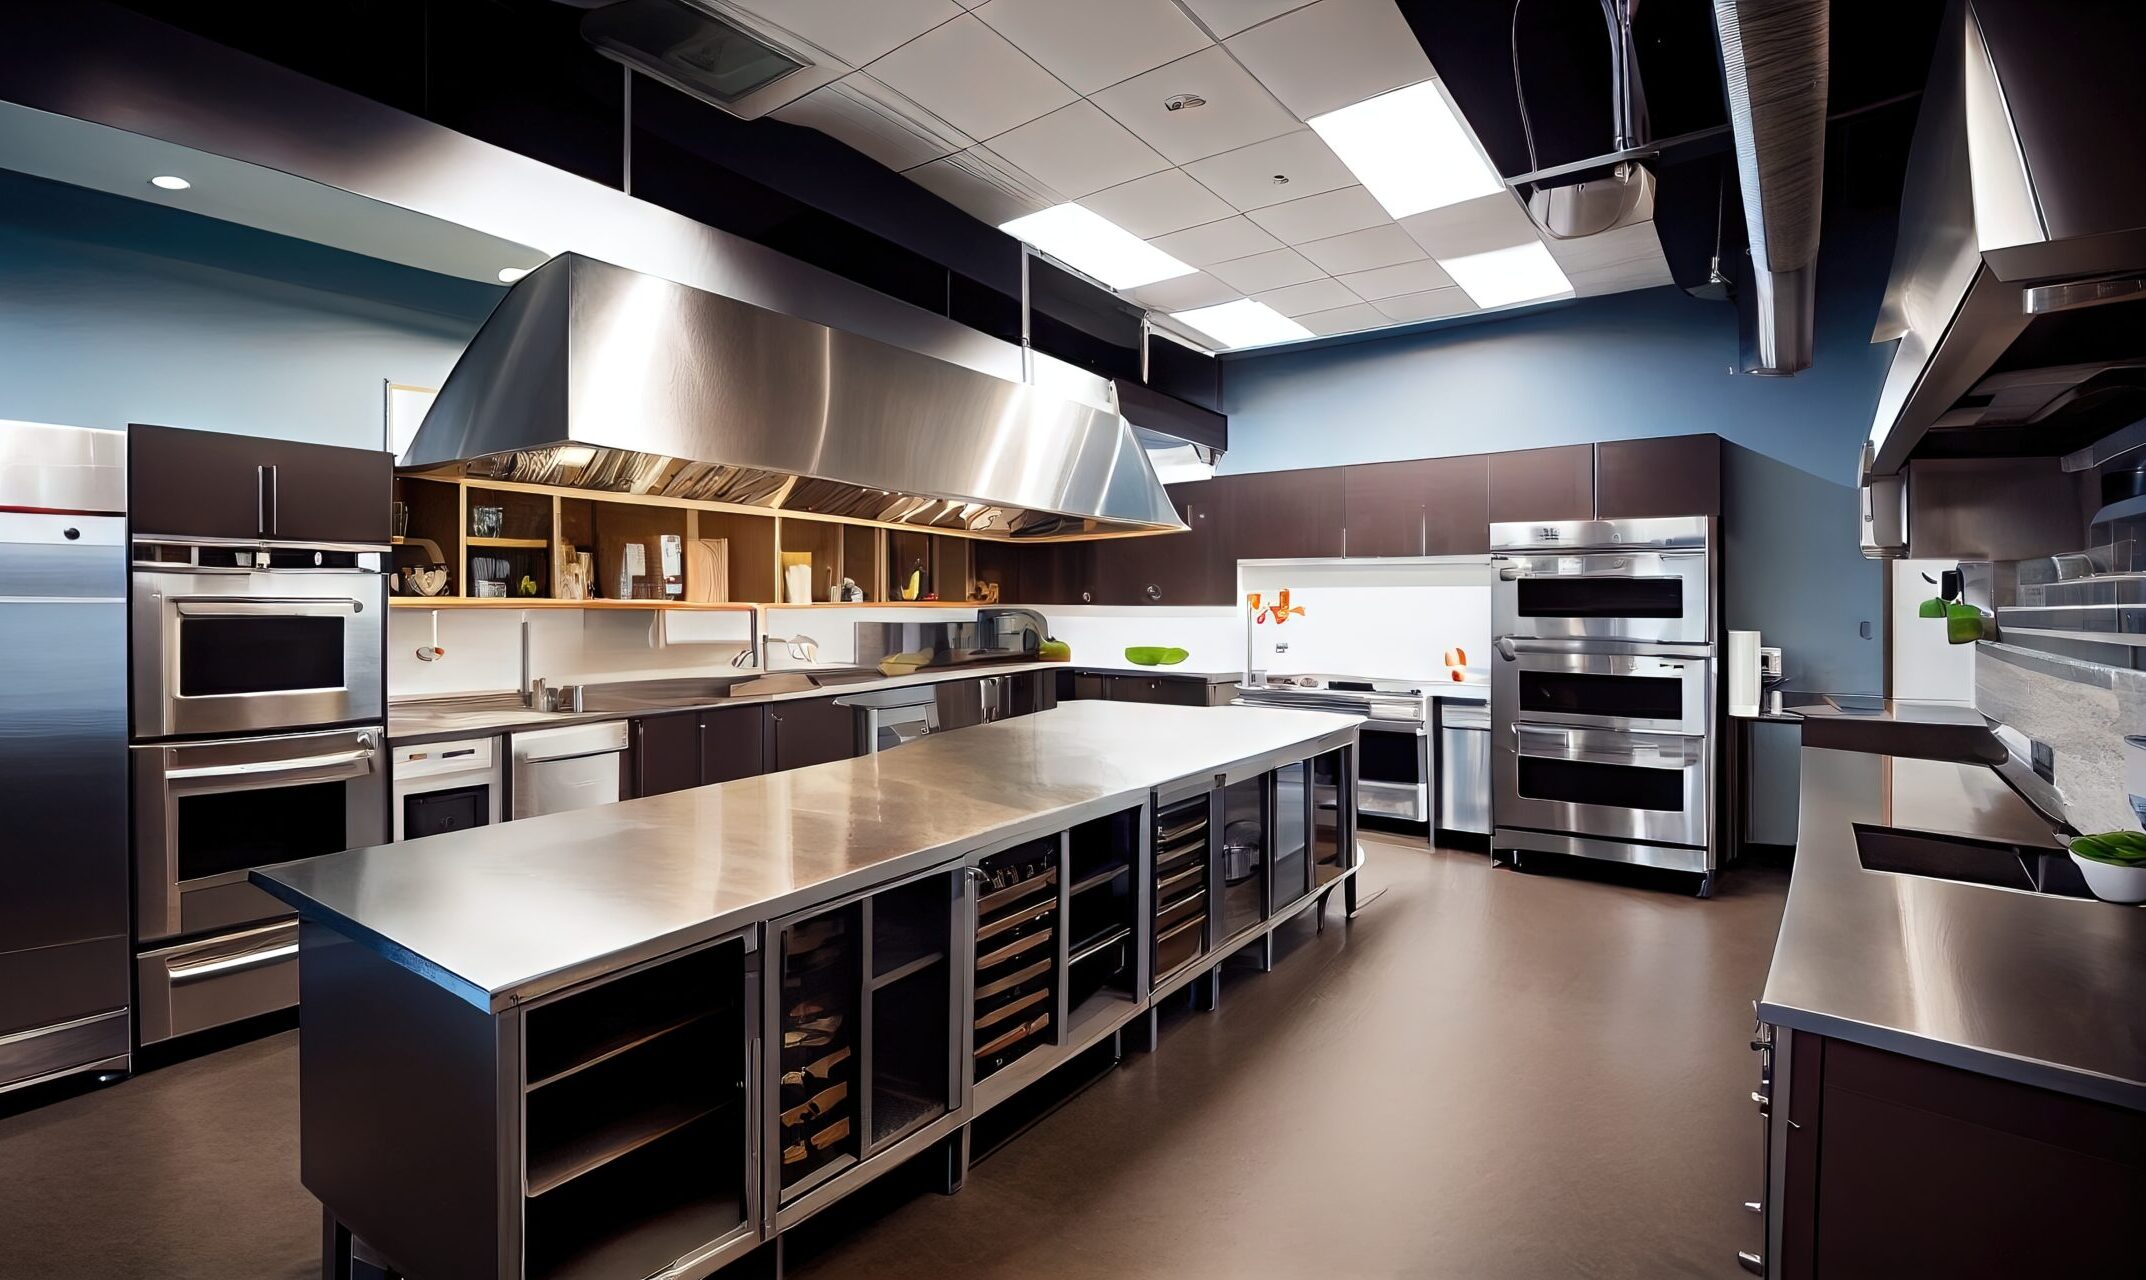 Commercial Kitchen Fire Safety During the Holidays